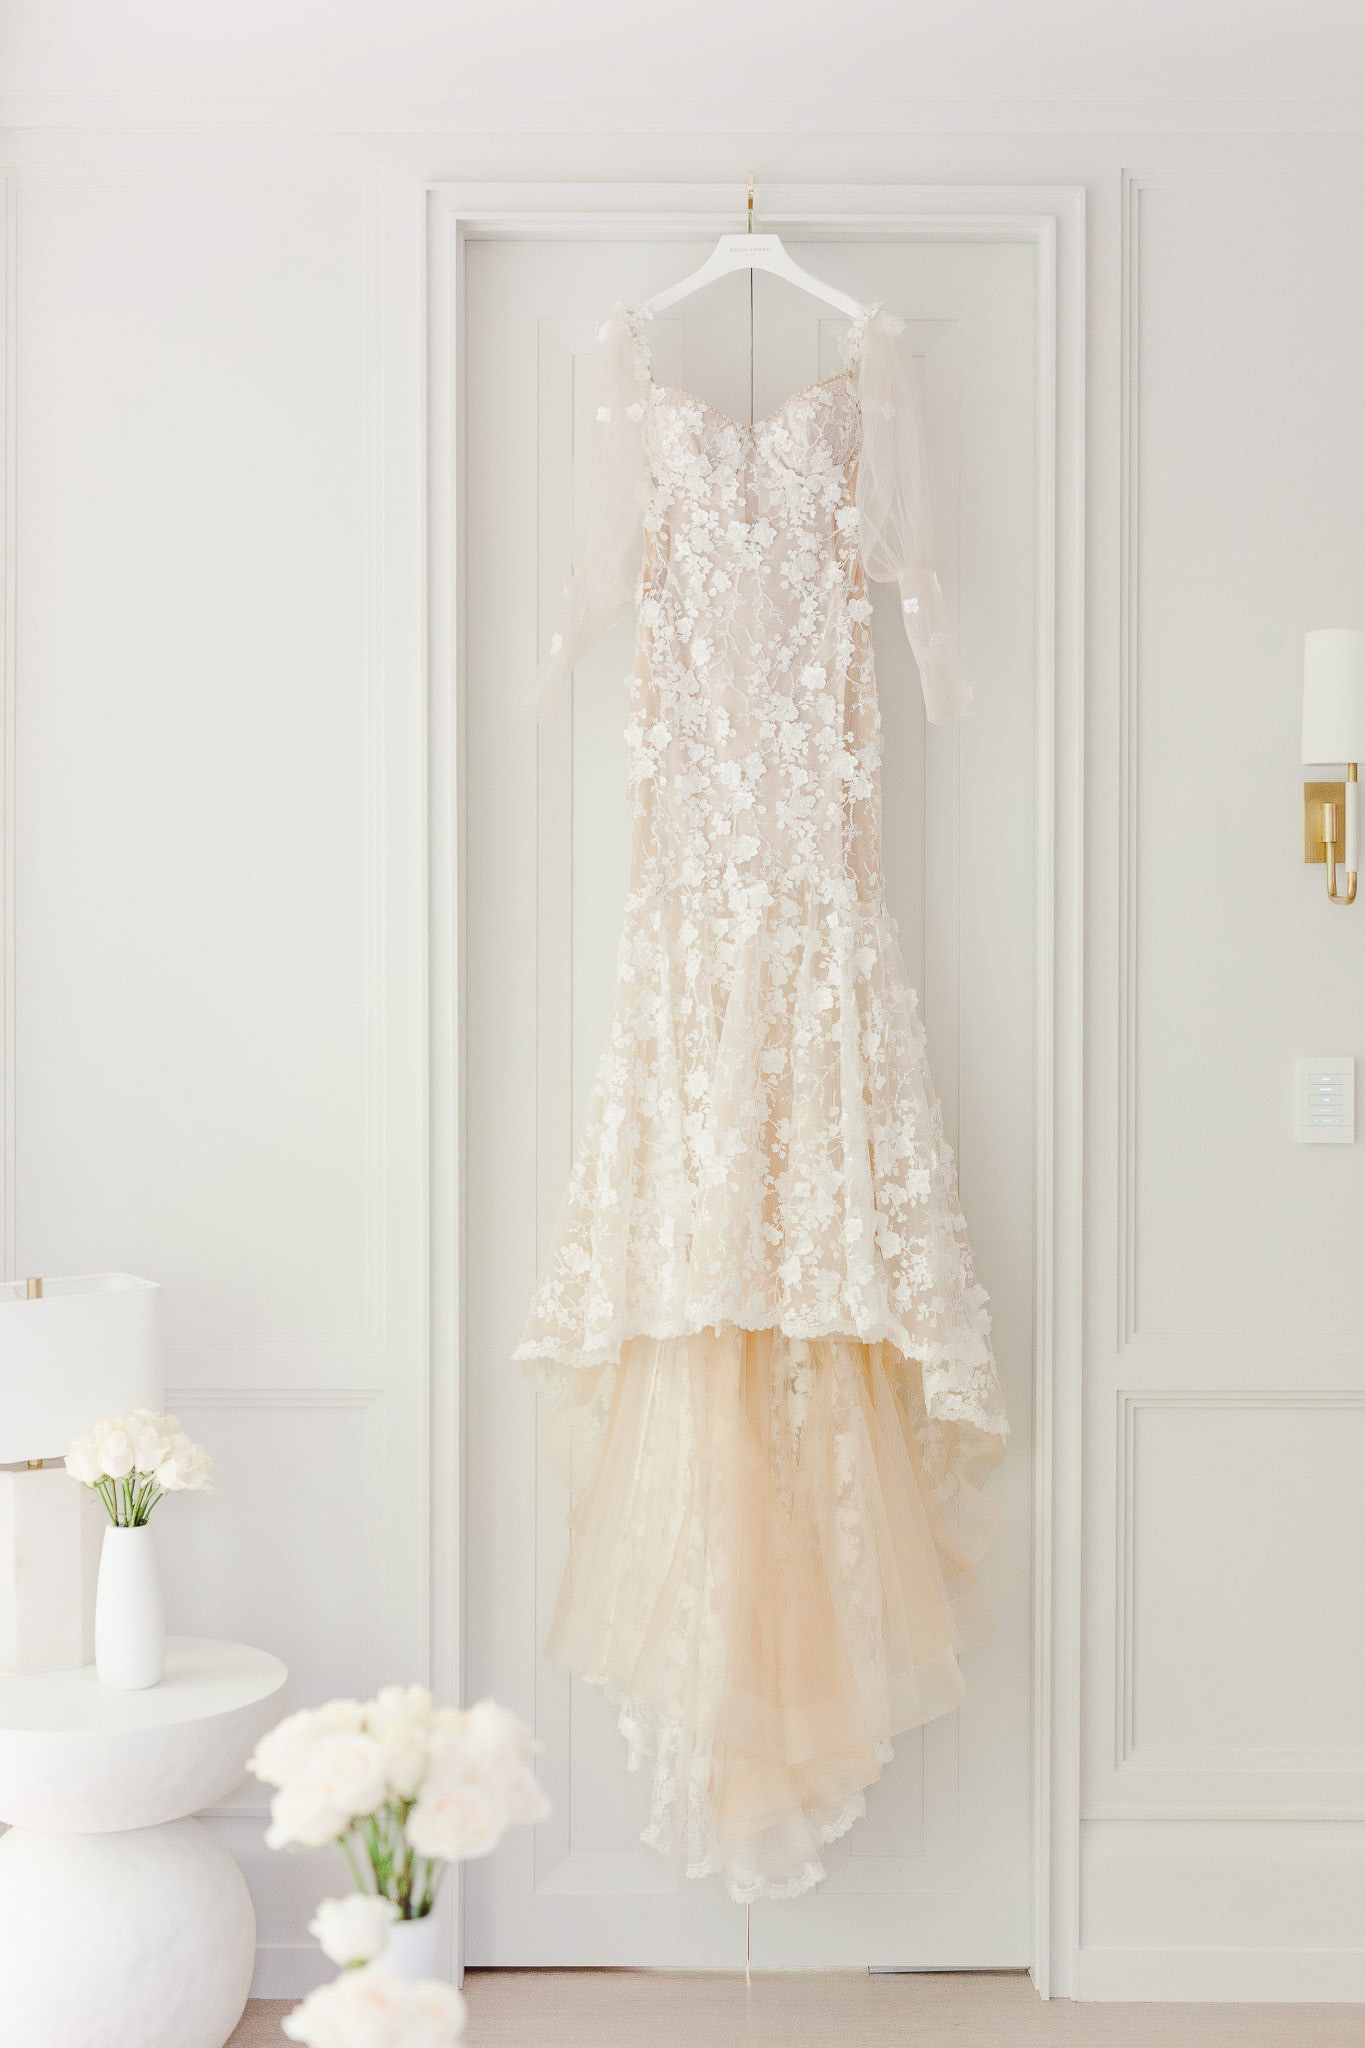 A reception wedding dress hangs in a white room.